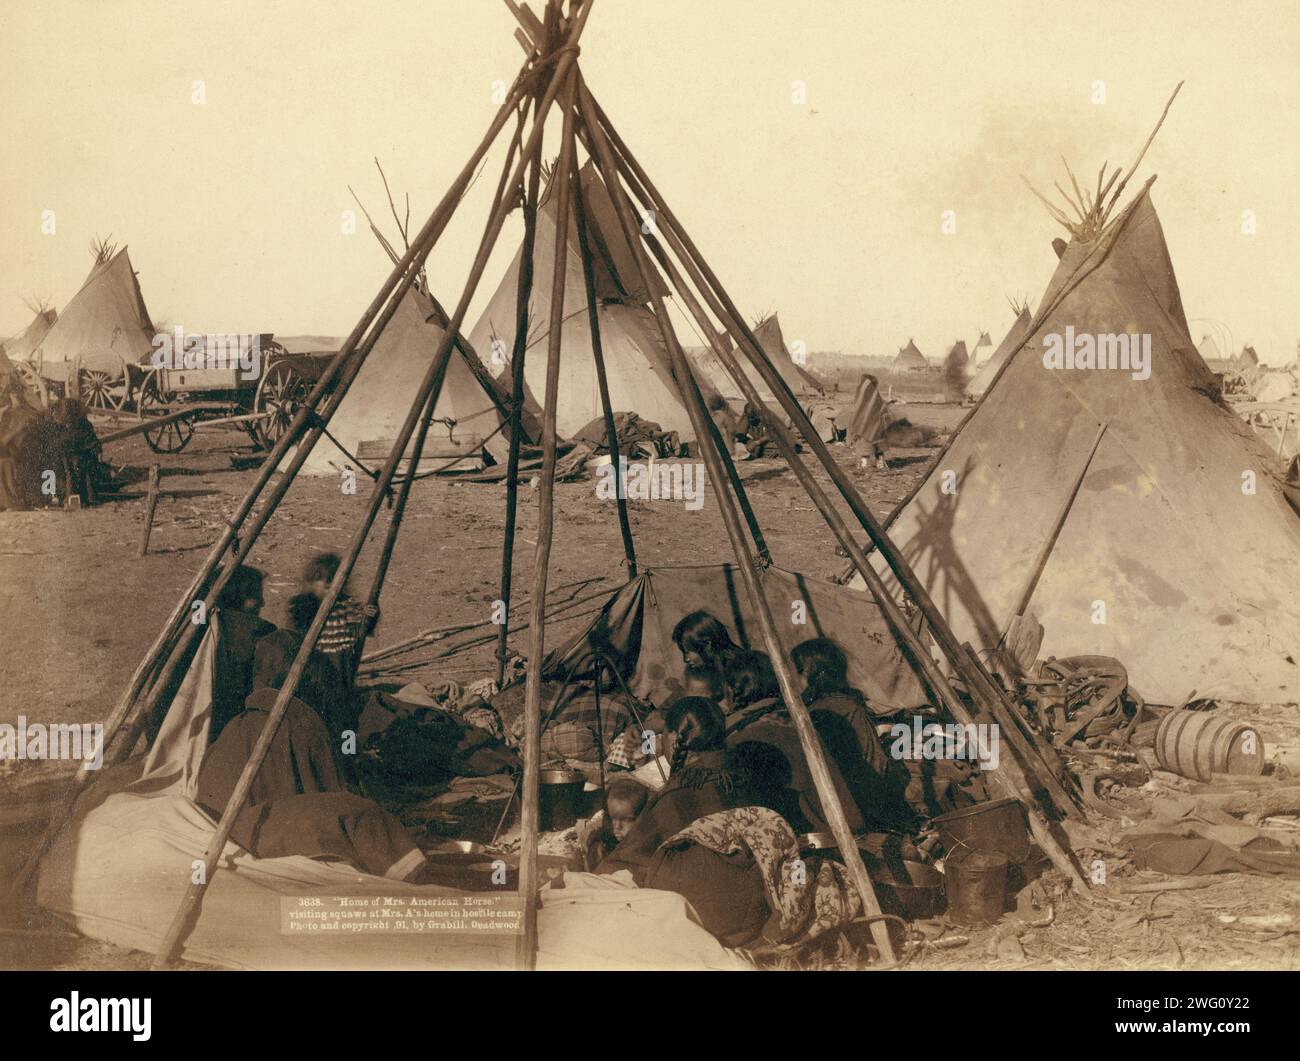 Home of Mrs American Horse Visiting squaws at Mrs A's home in hostile camp, 1891. Oglala women and children seated inside an uncovered tipi frame in an encampment, most are looking away from the camera, probably on or near Pine Ridge Reservation. Stock Photo